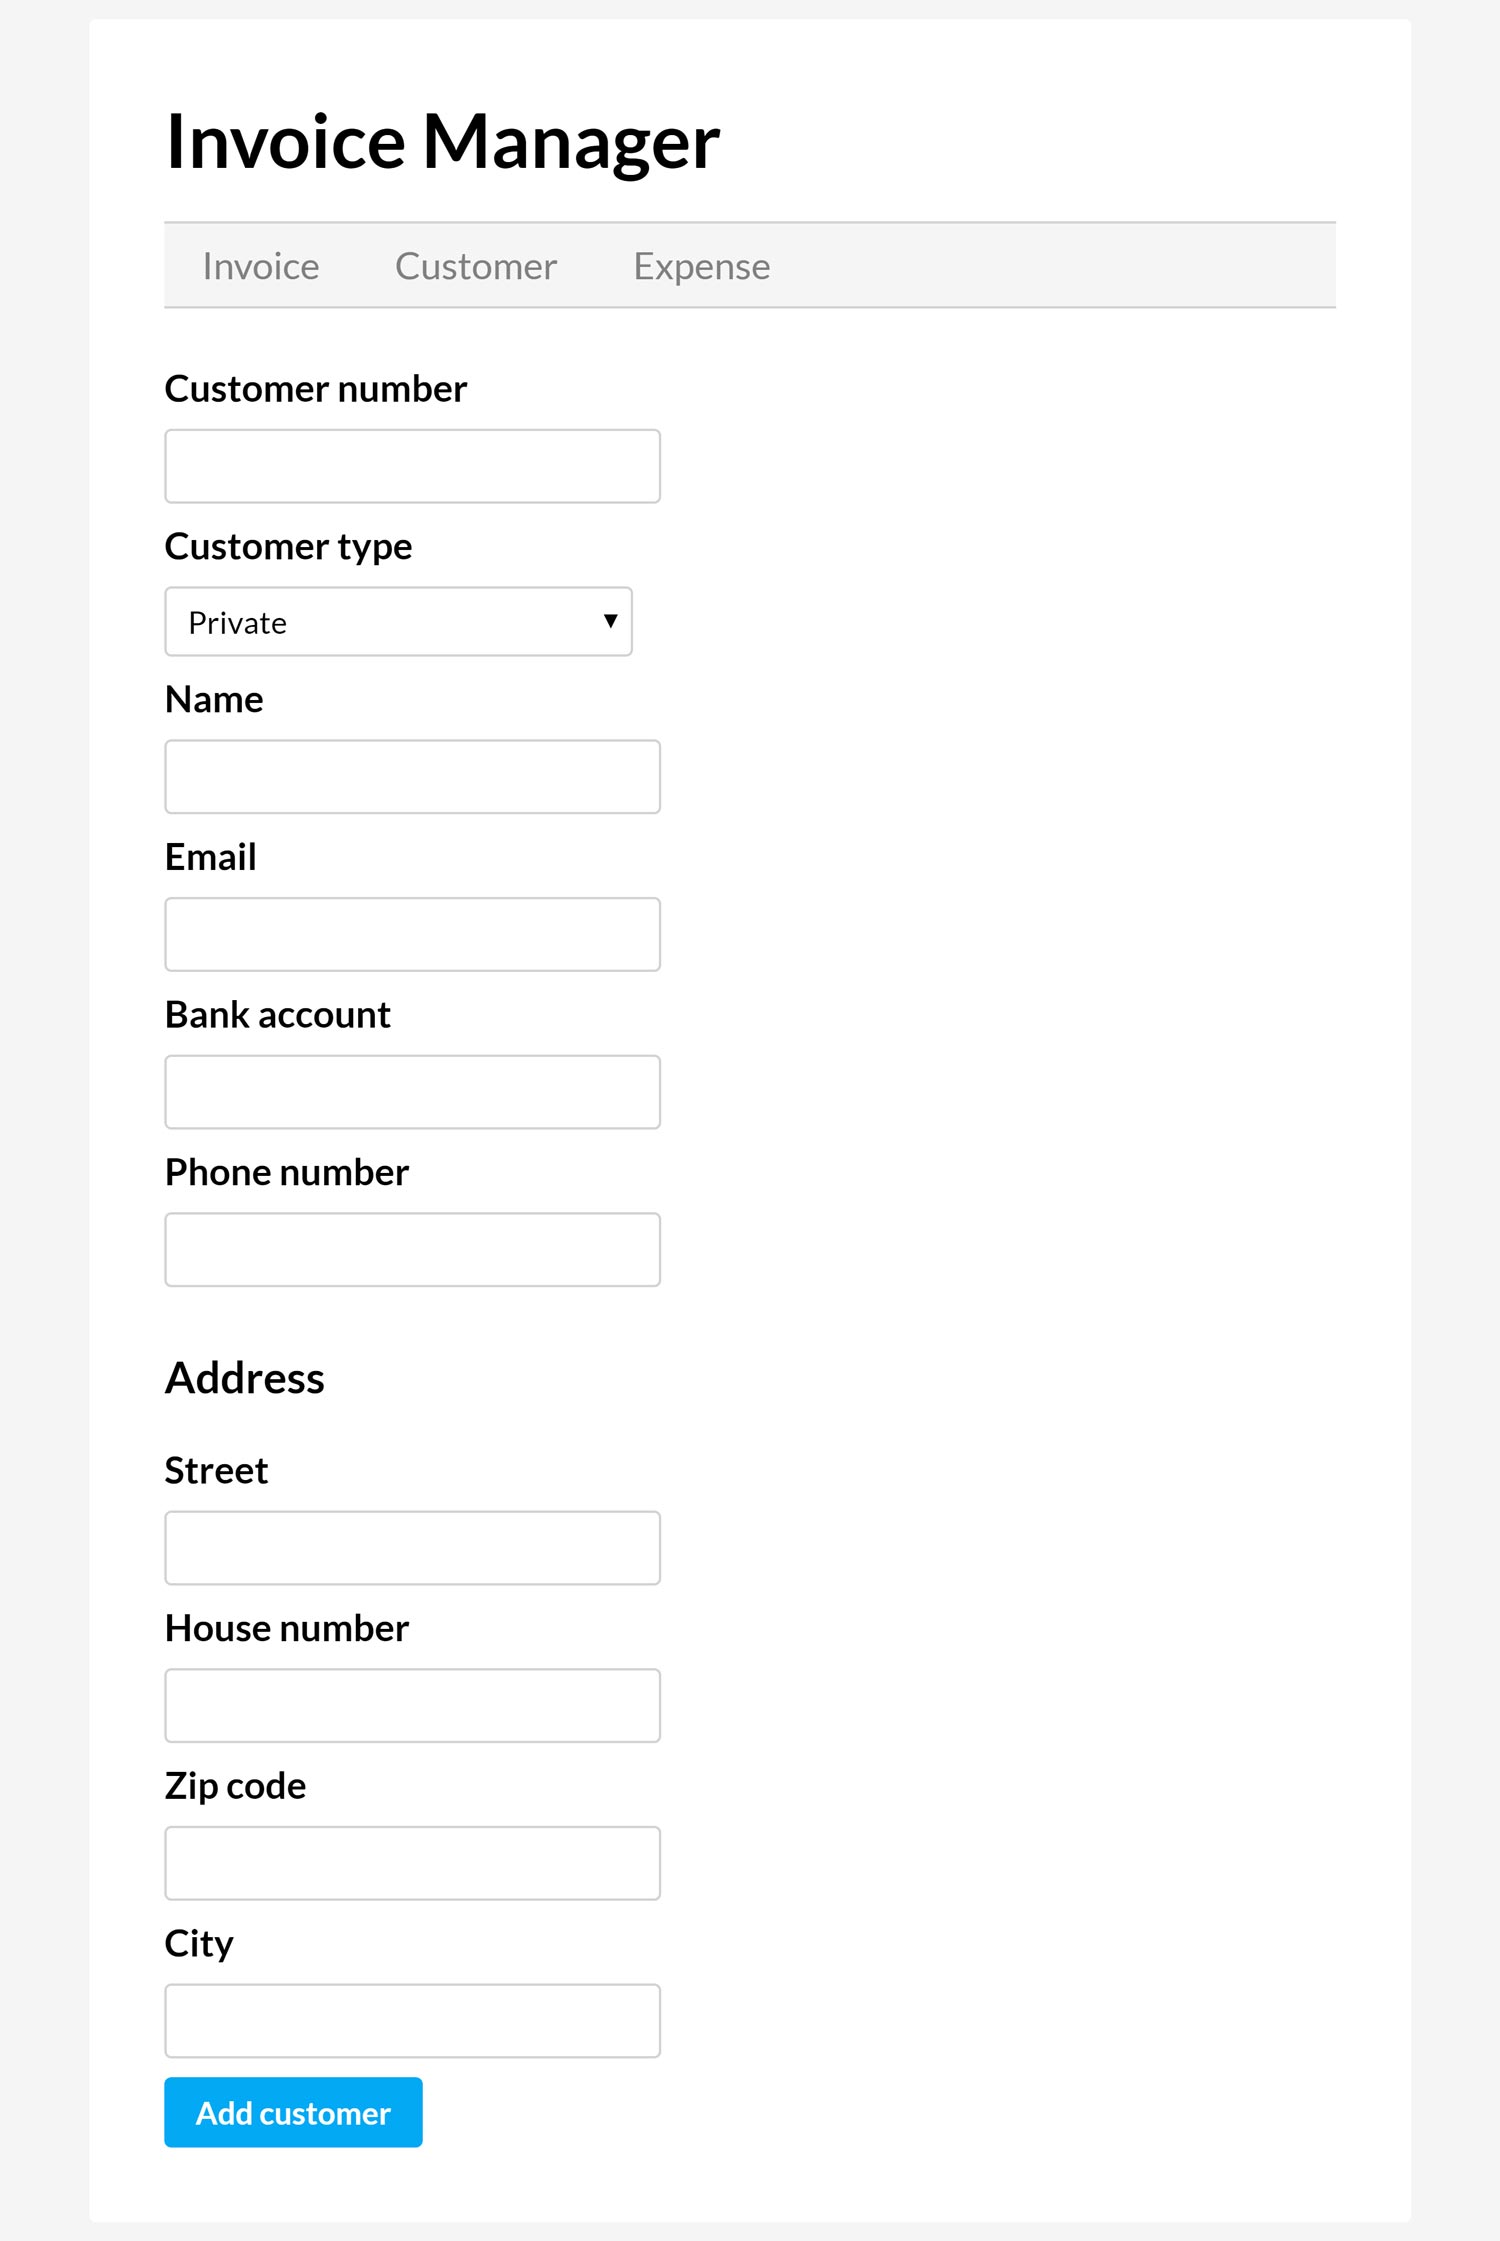 Invoice manager form for adding new customers